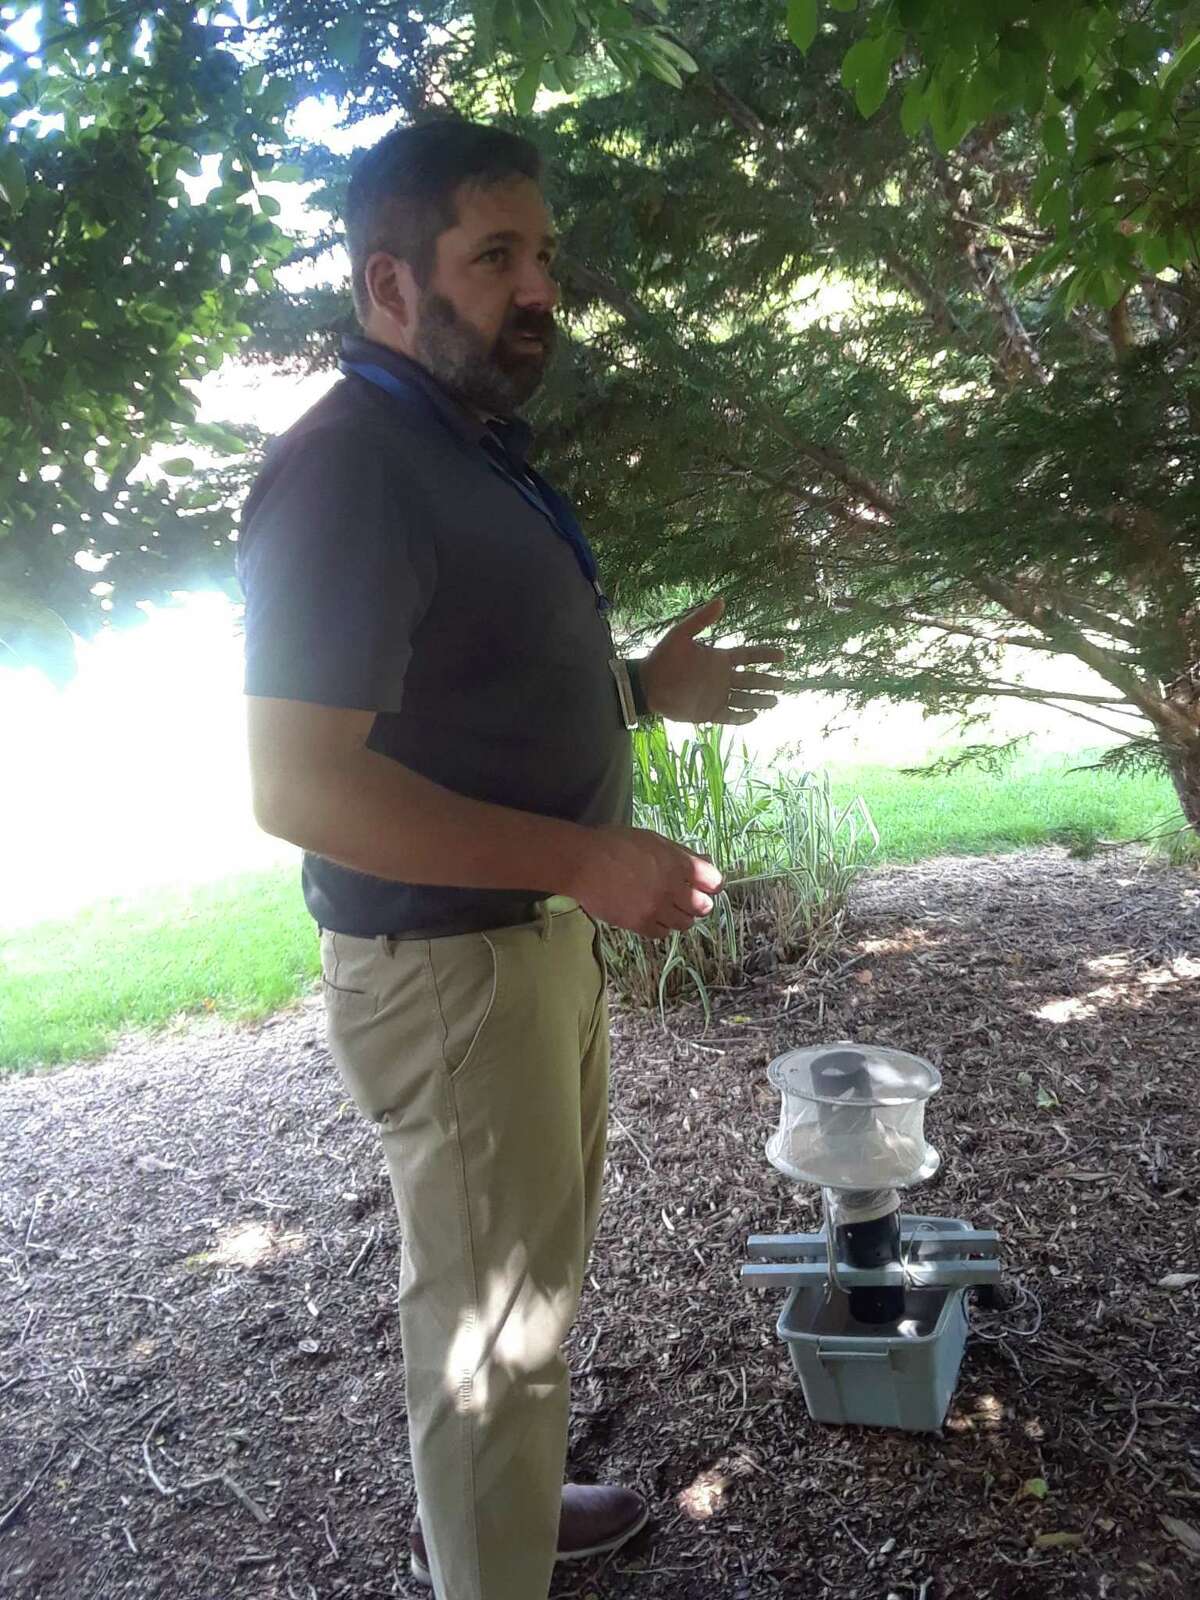 John Shepard of the Connecticut Agricultural Experiment Station in New Haven demonstrates how to hang a mosquito trap at the station on June 3, 2019.